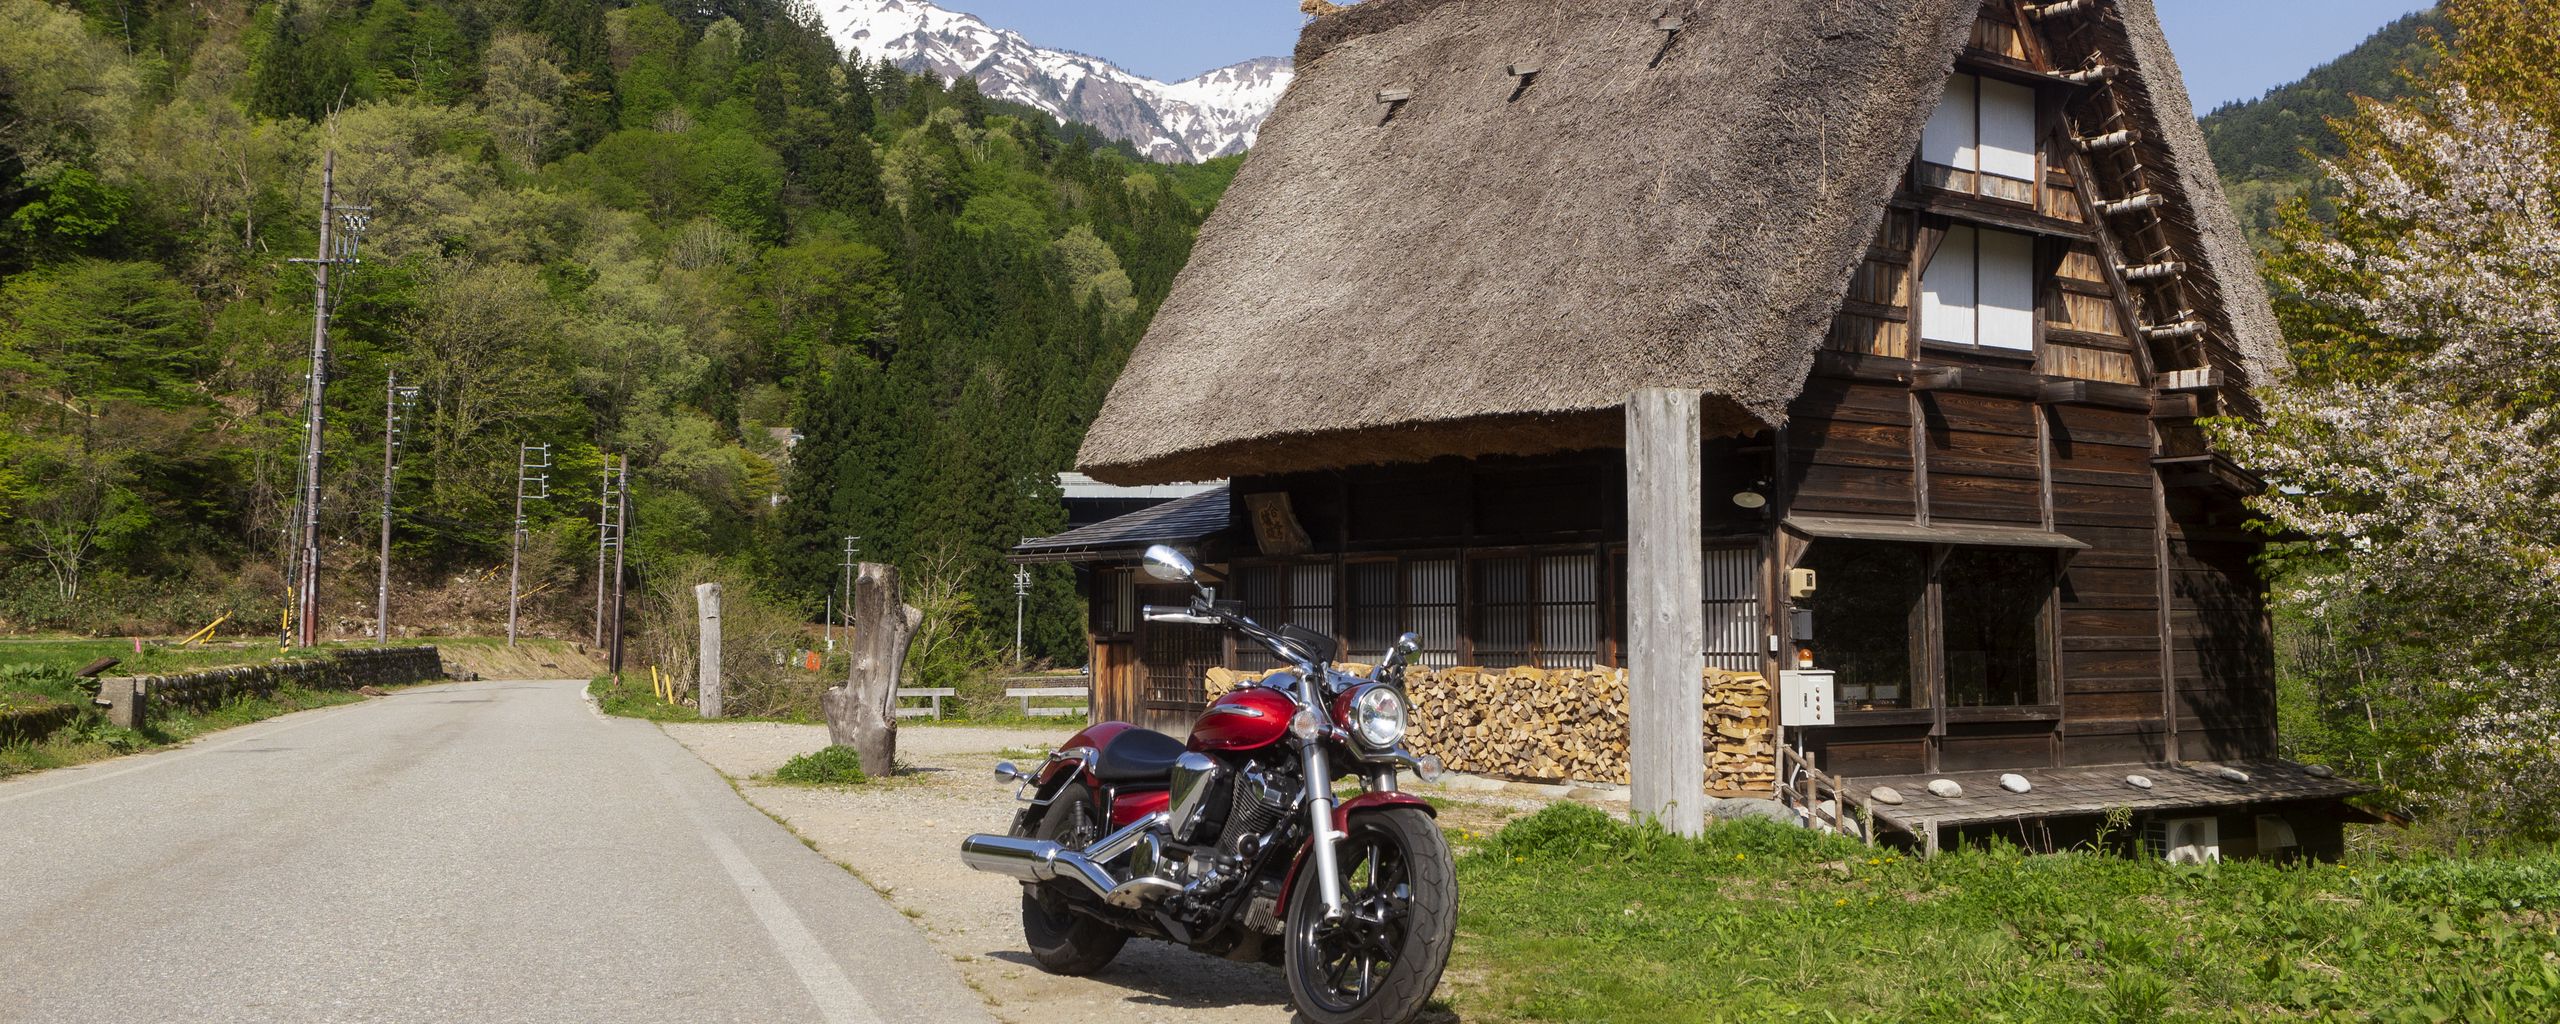 2560x1024 Wallpaper motorcycle, red, house, trees, mountain